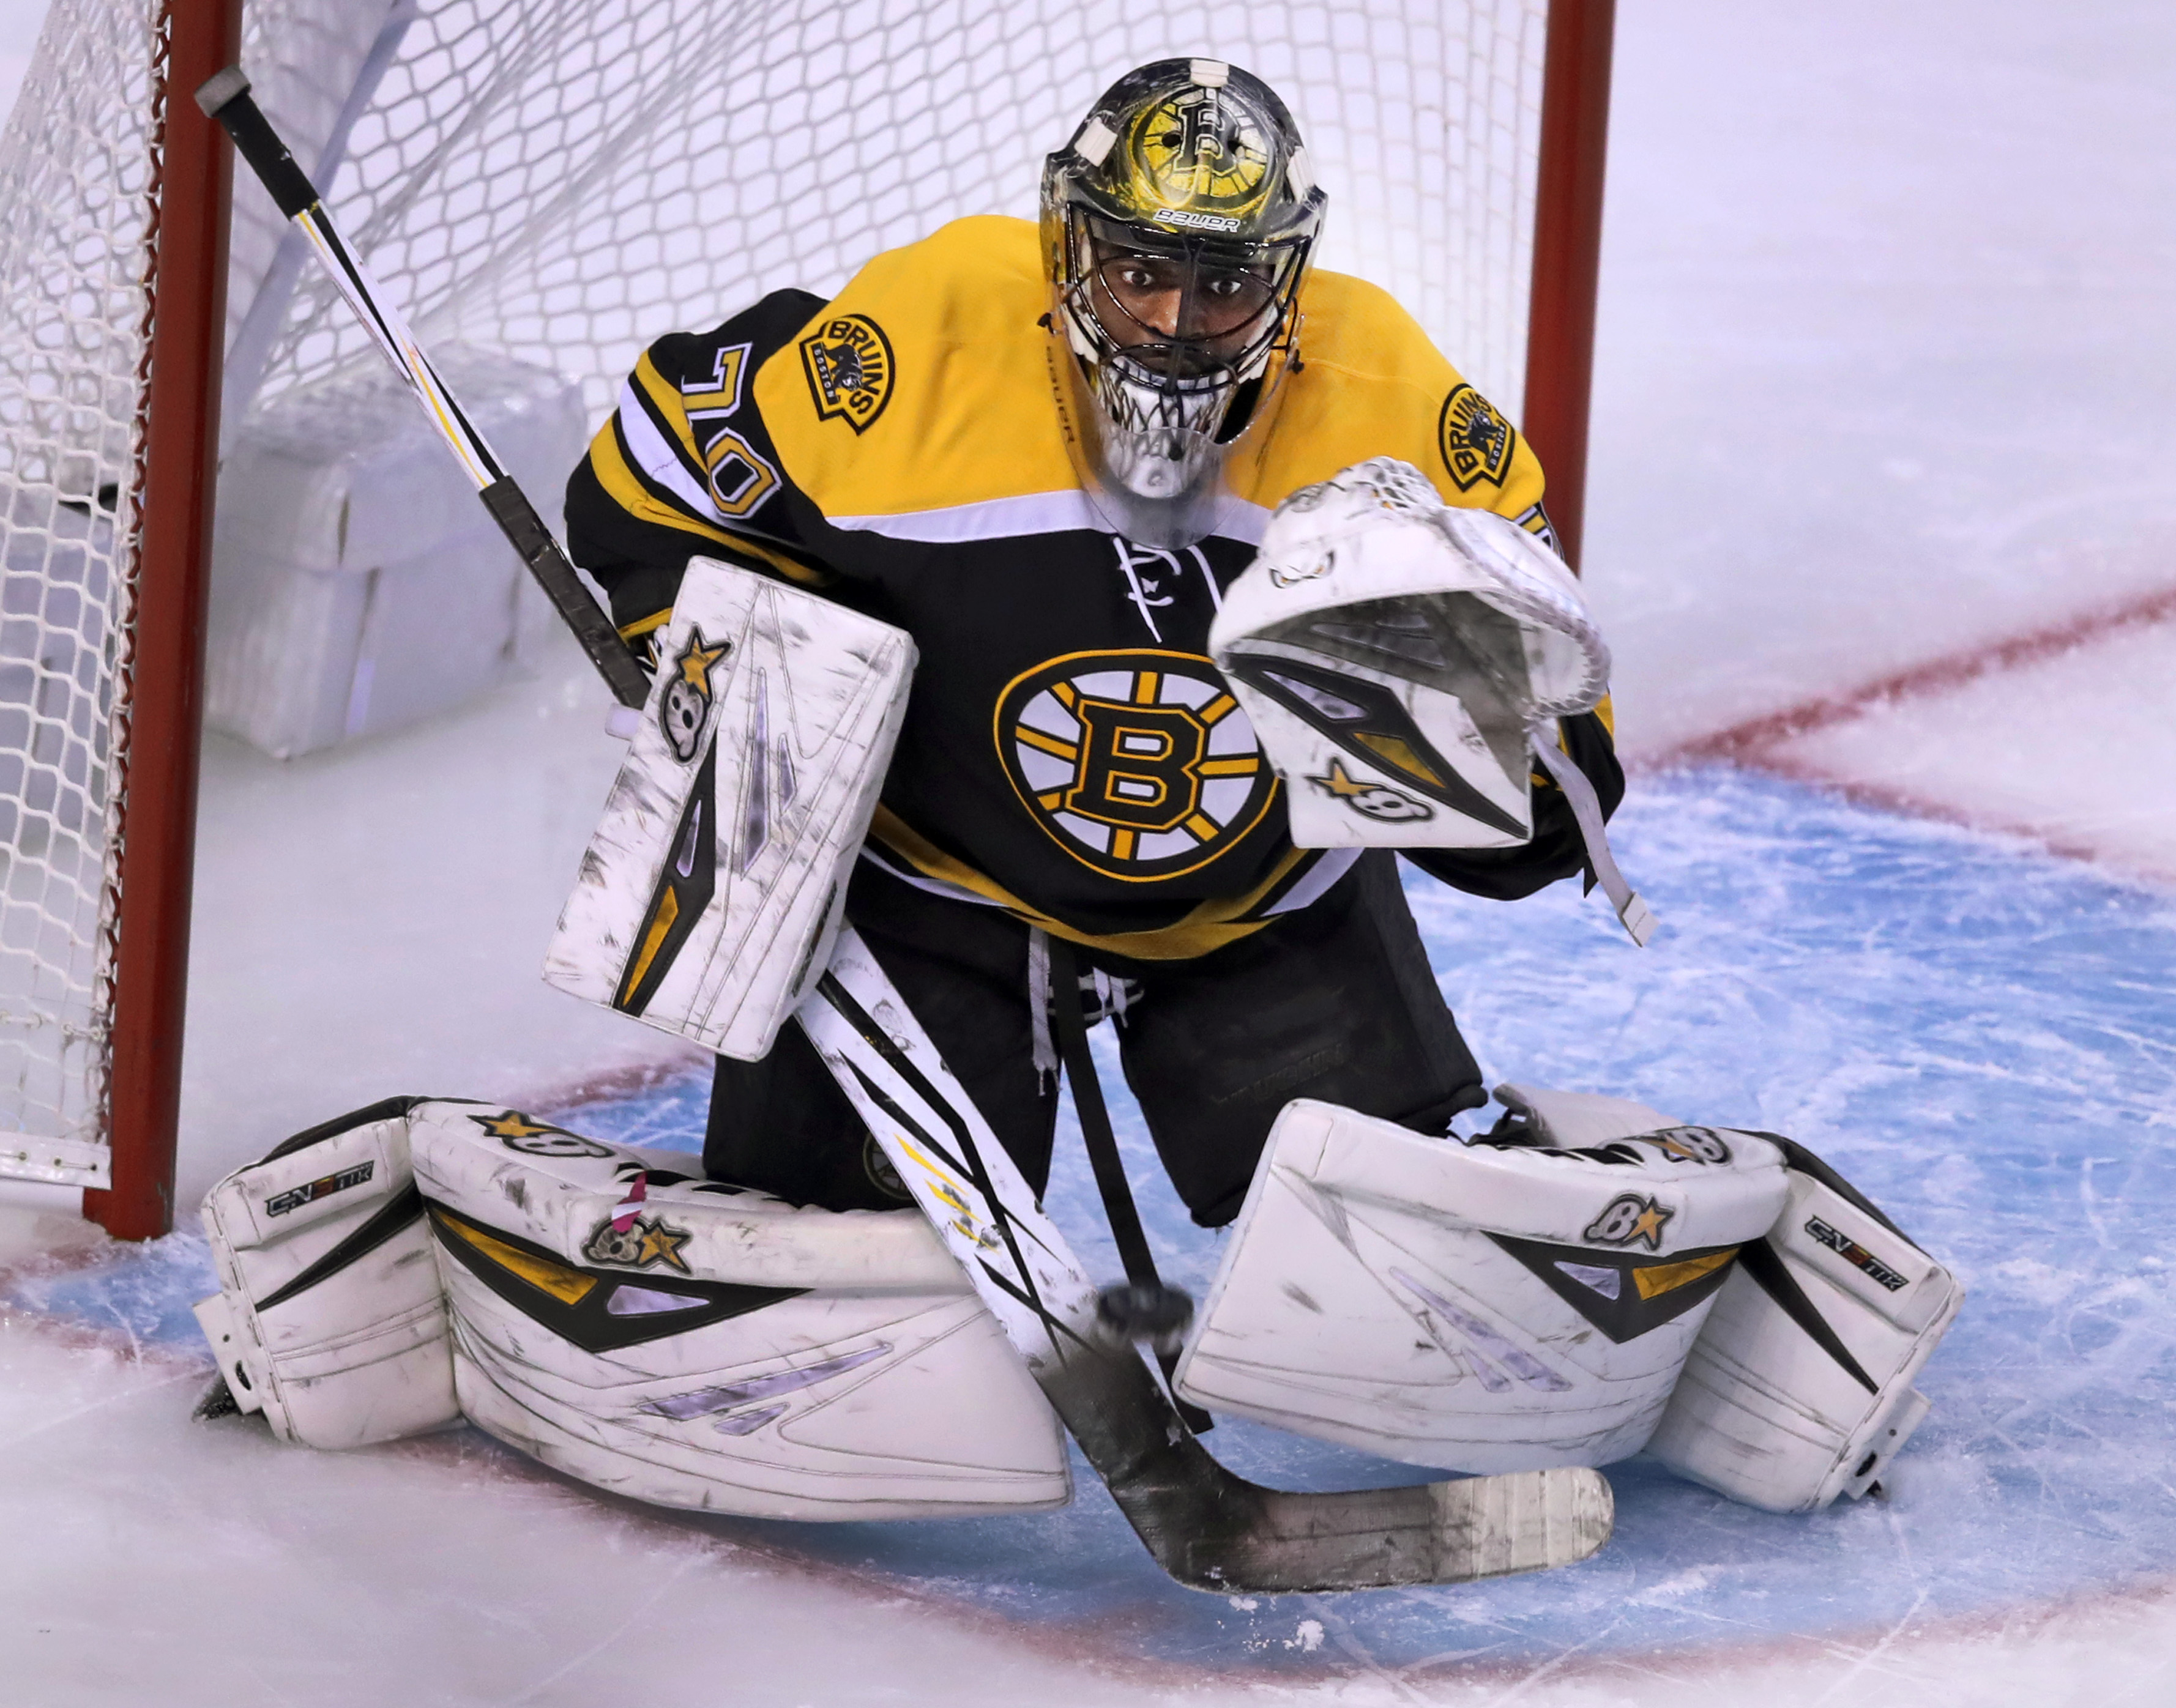 Malcolm Subban to start for Bruins - NBC Sports